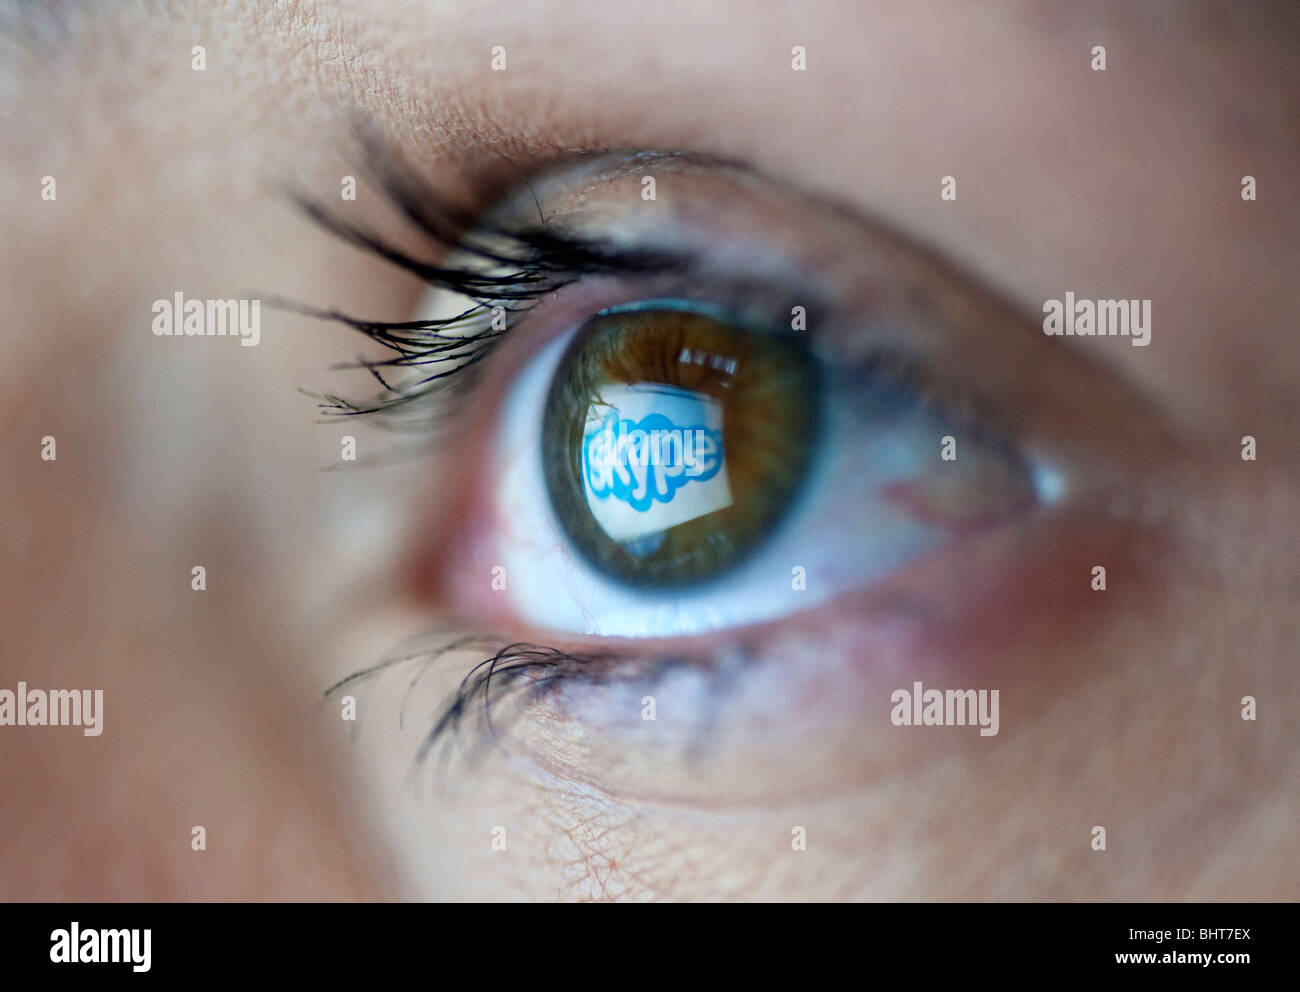 Skype internet telephone and video website logo reflected in womans eye from computer screen Stock Photo